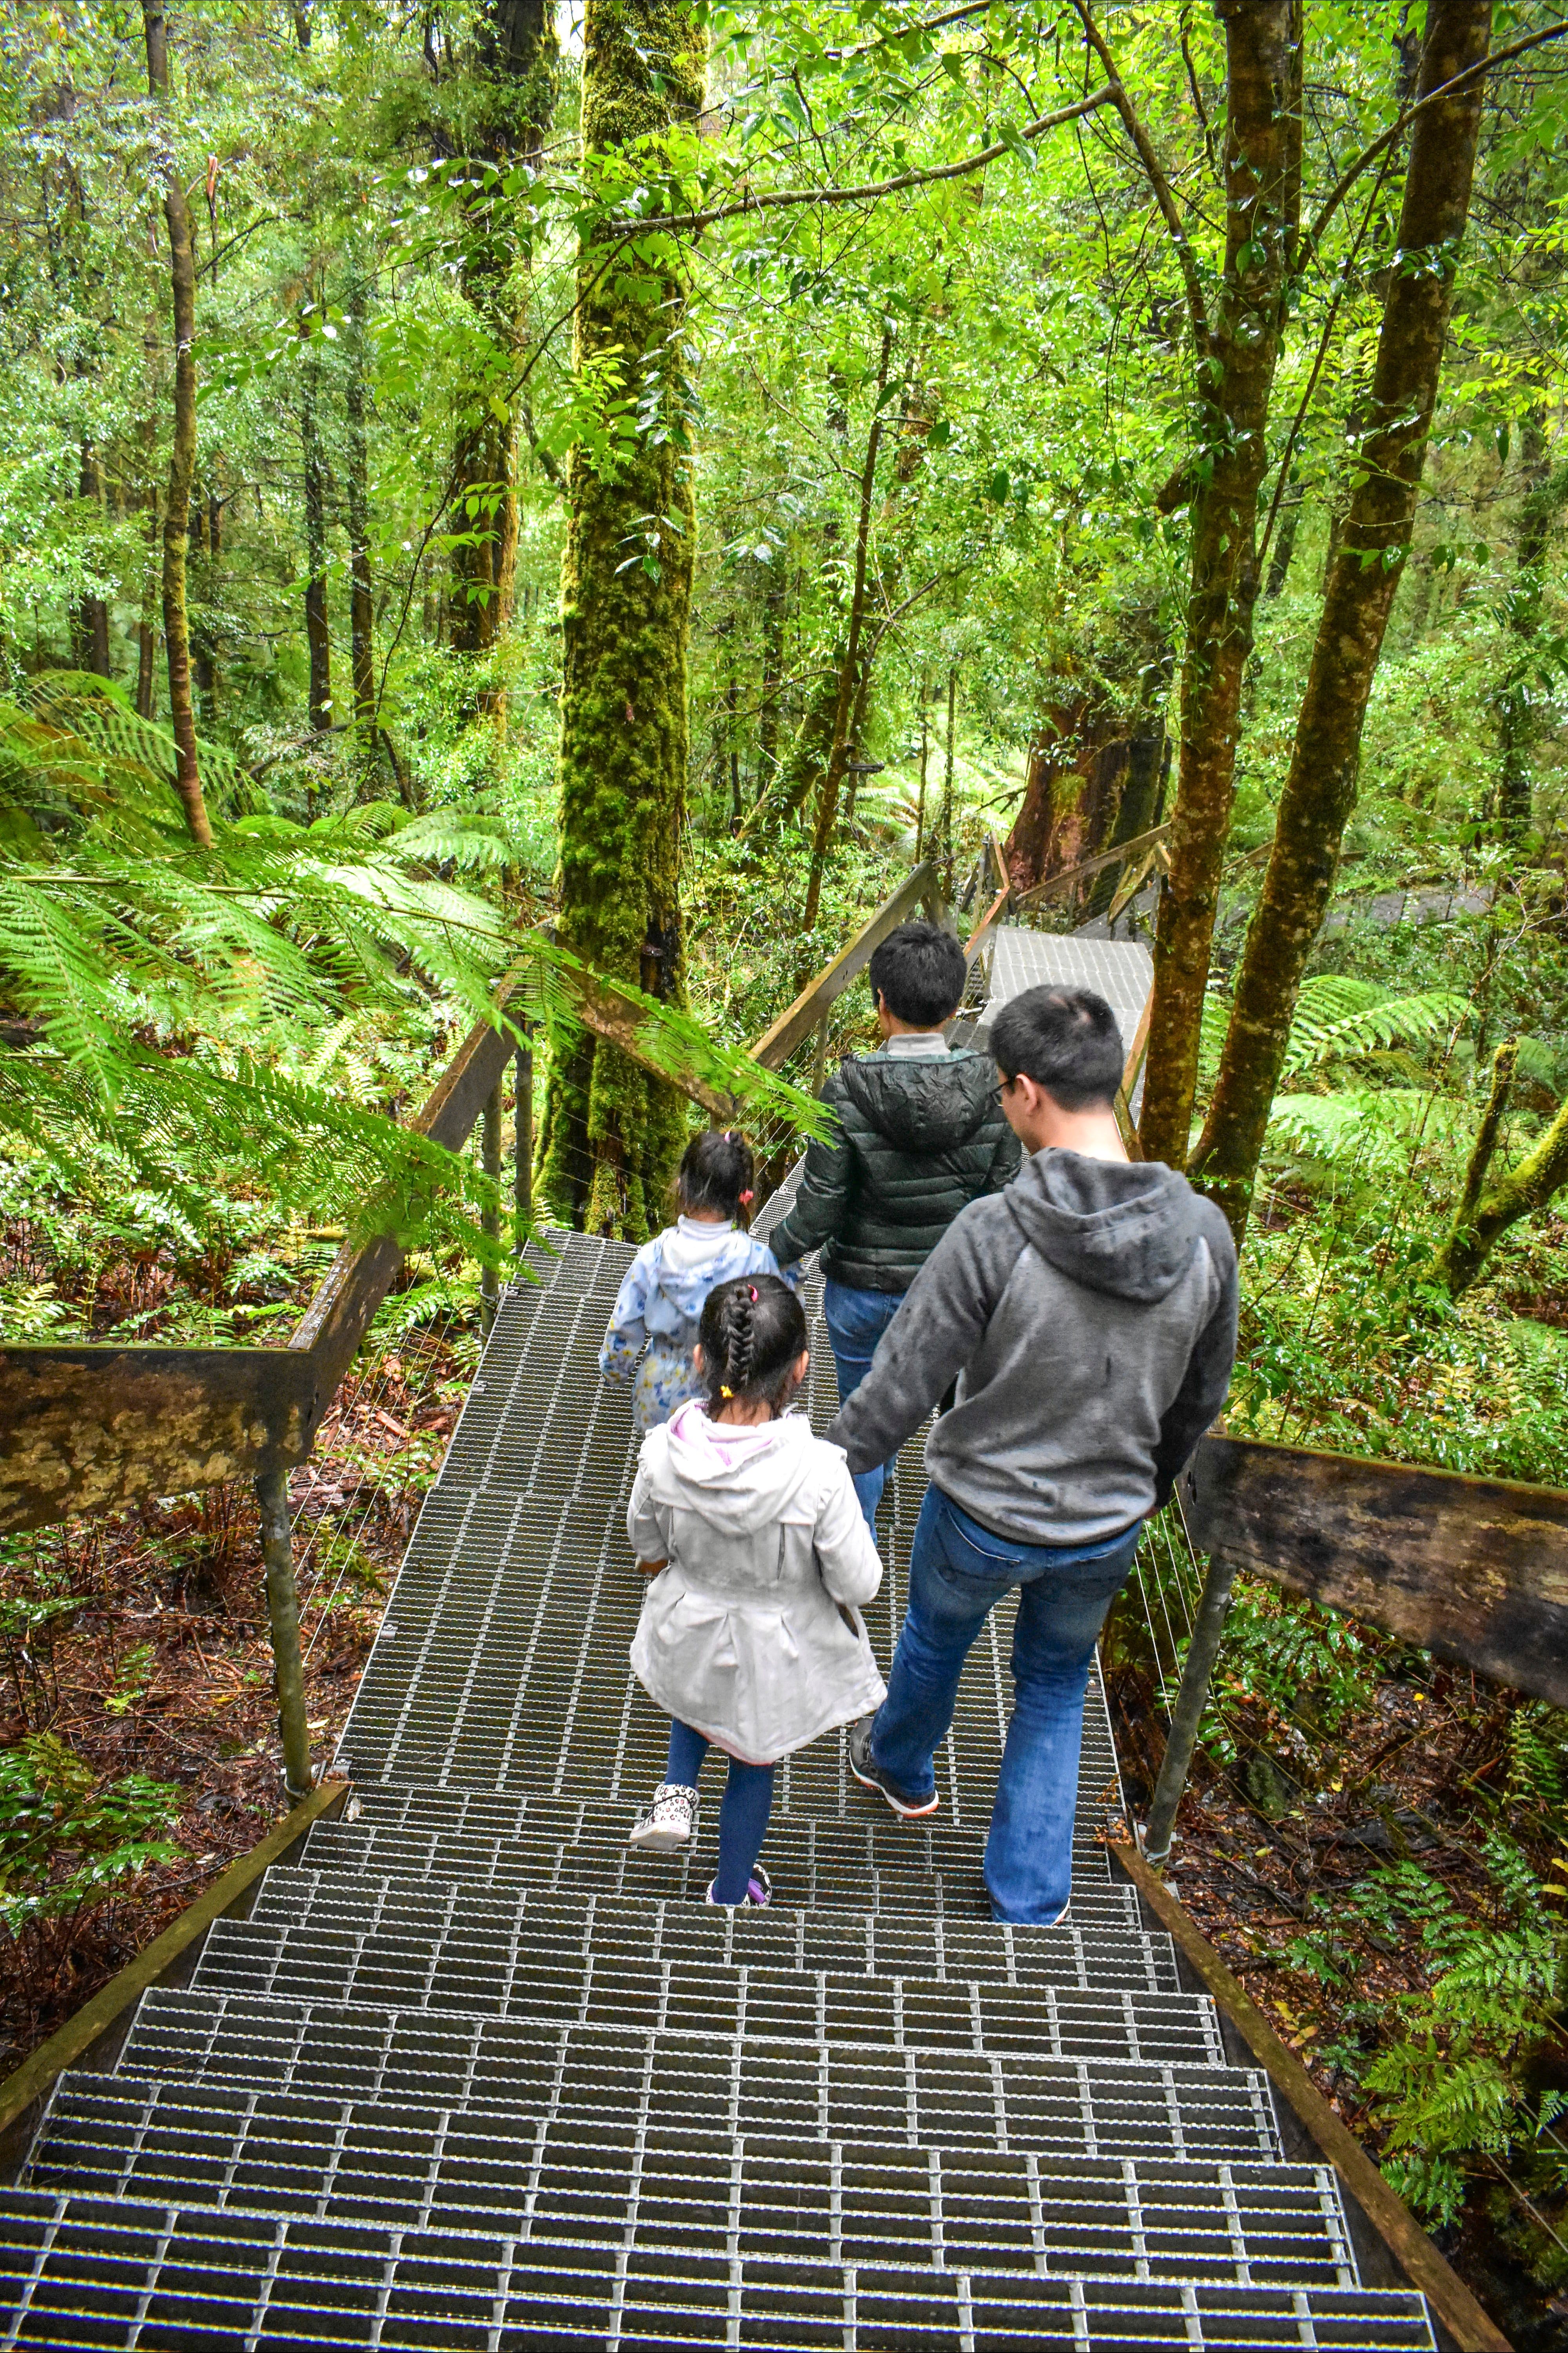 Yarra Ranges National Park - Find Attractions